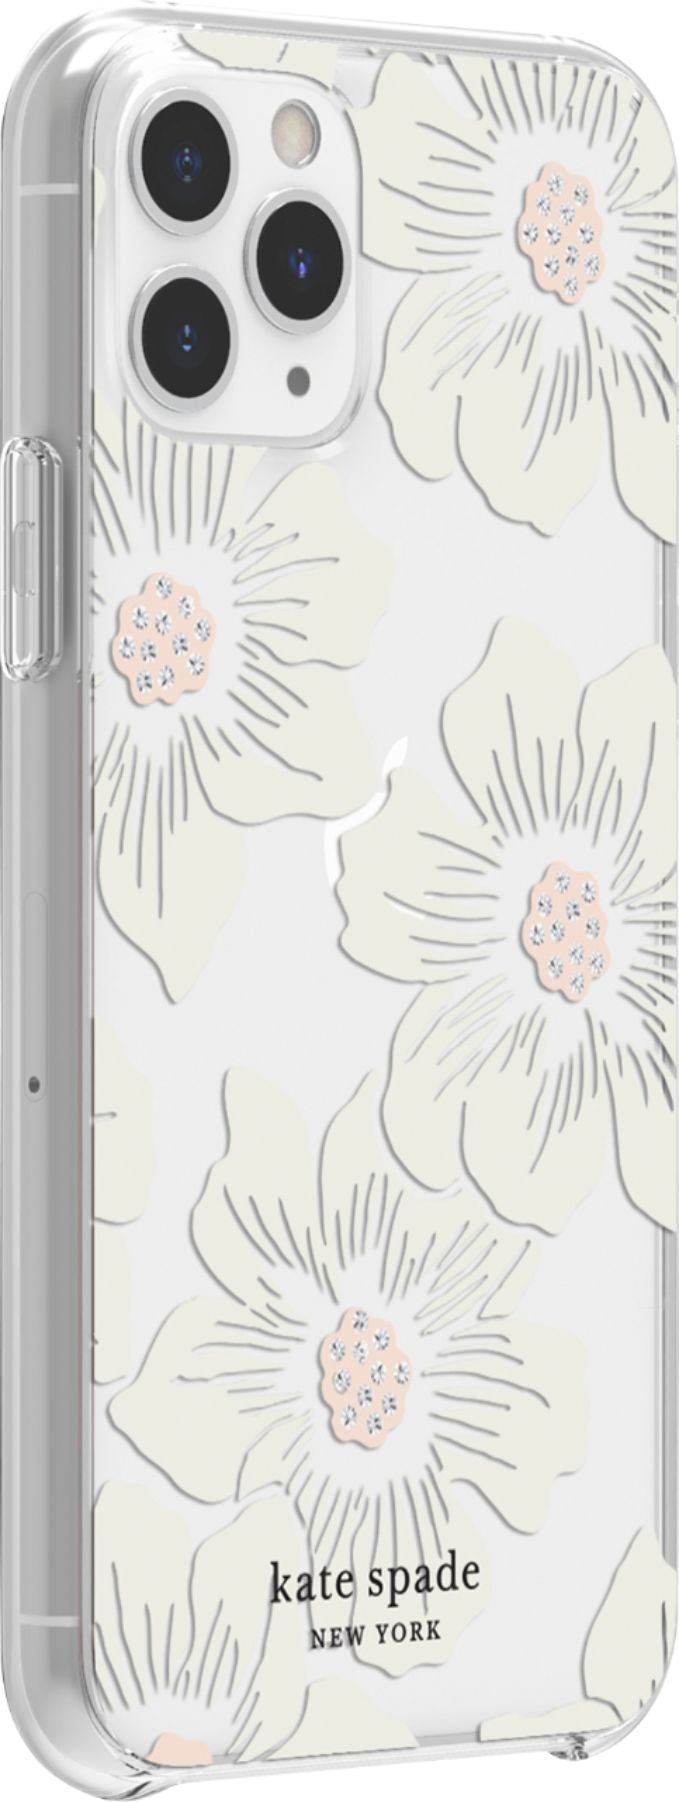 Angle View: kate spade new york - Protective Hard Shell Case for Apple® iPhone® 11 Pro - Cream With Stones/Hollyhock Floral Clear